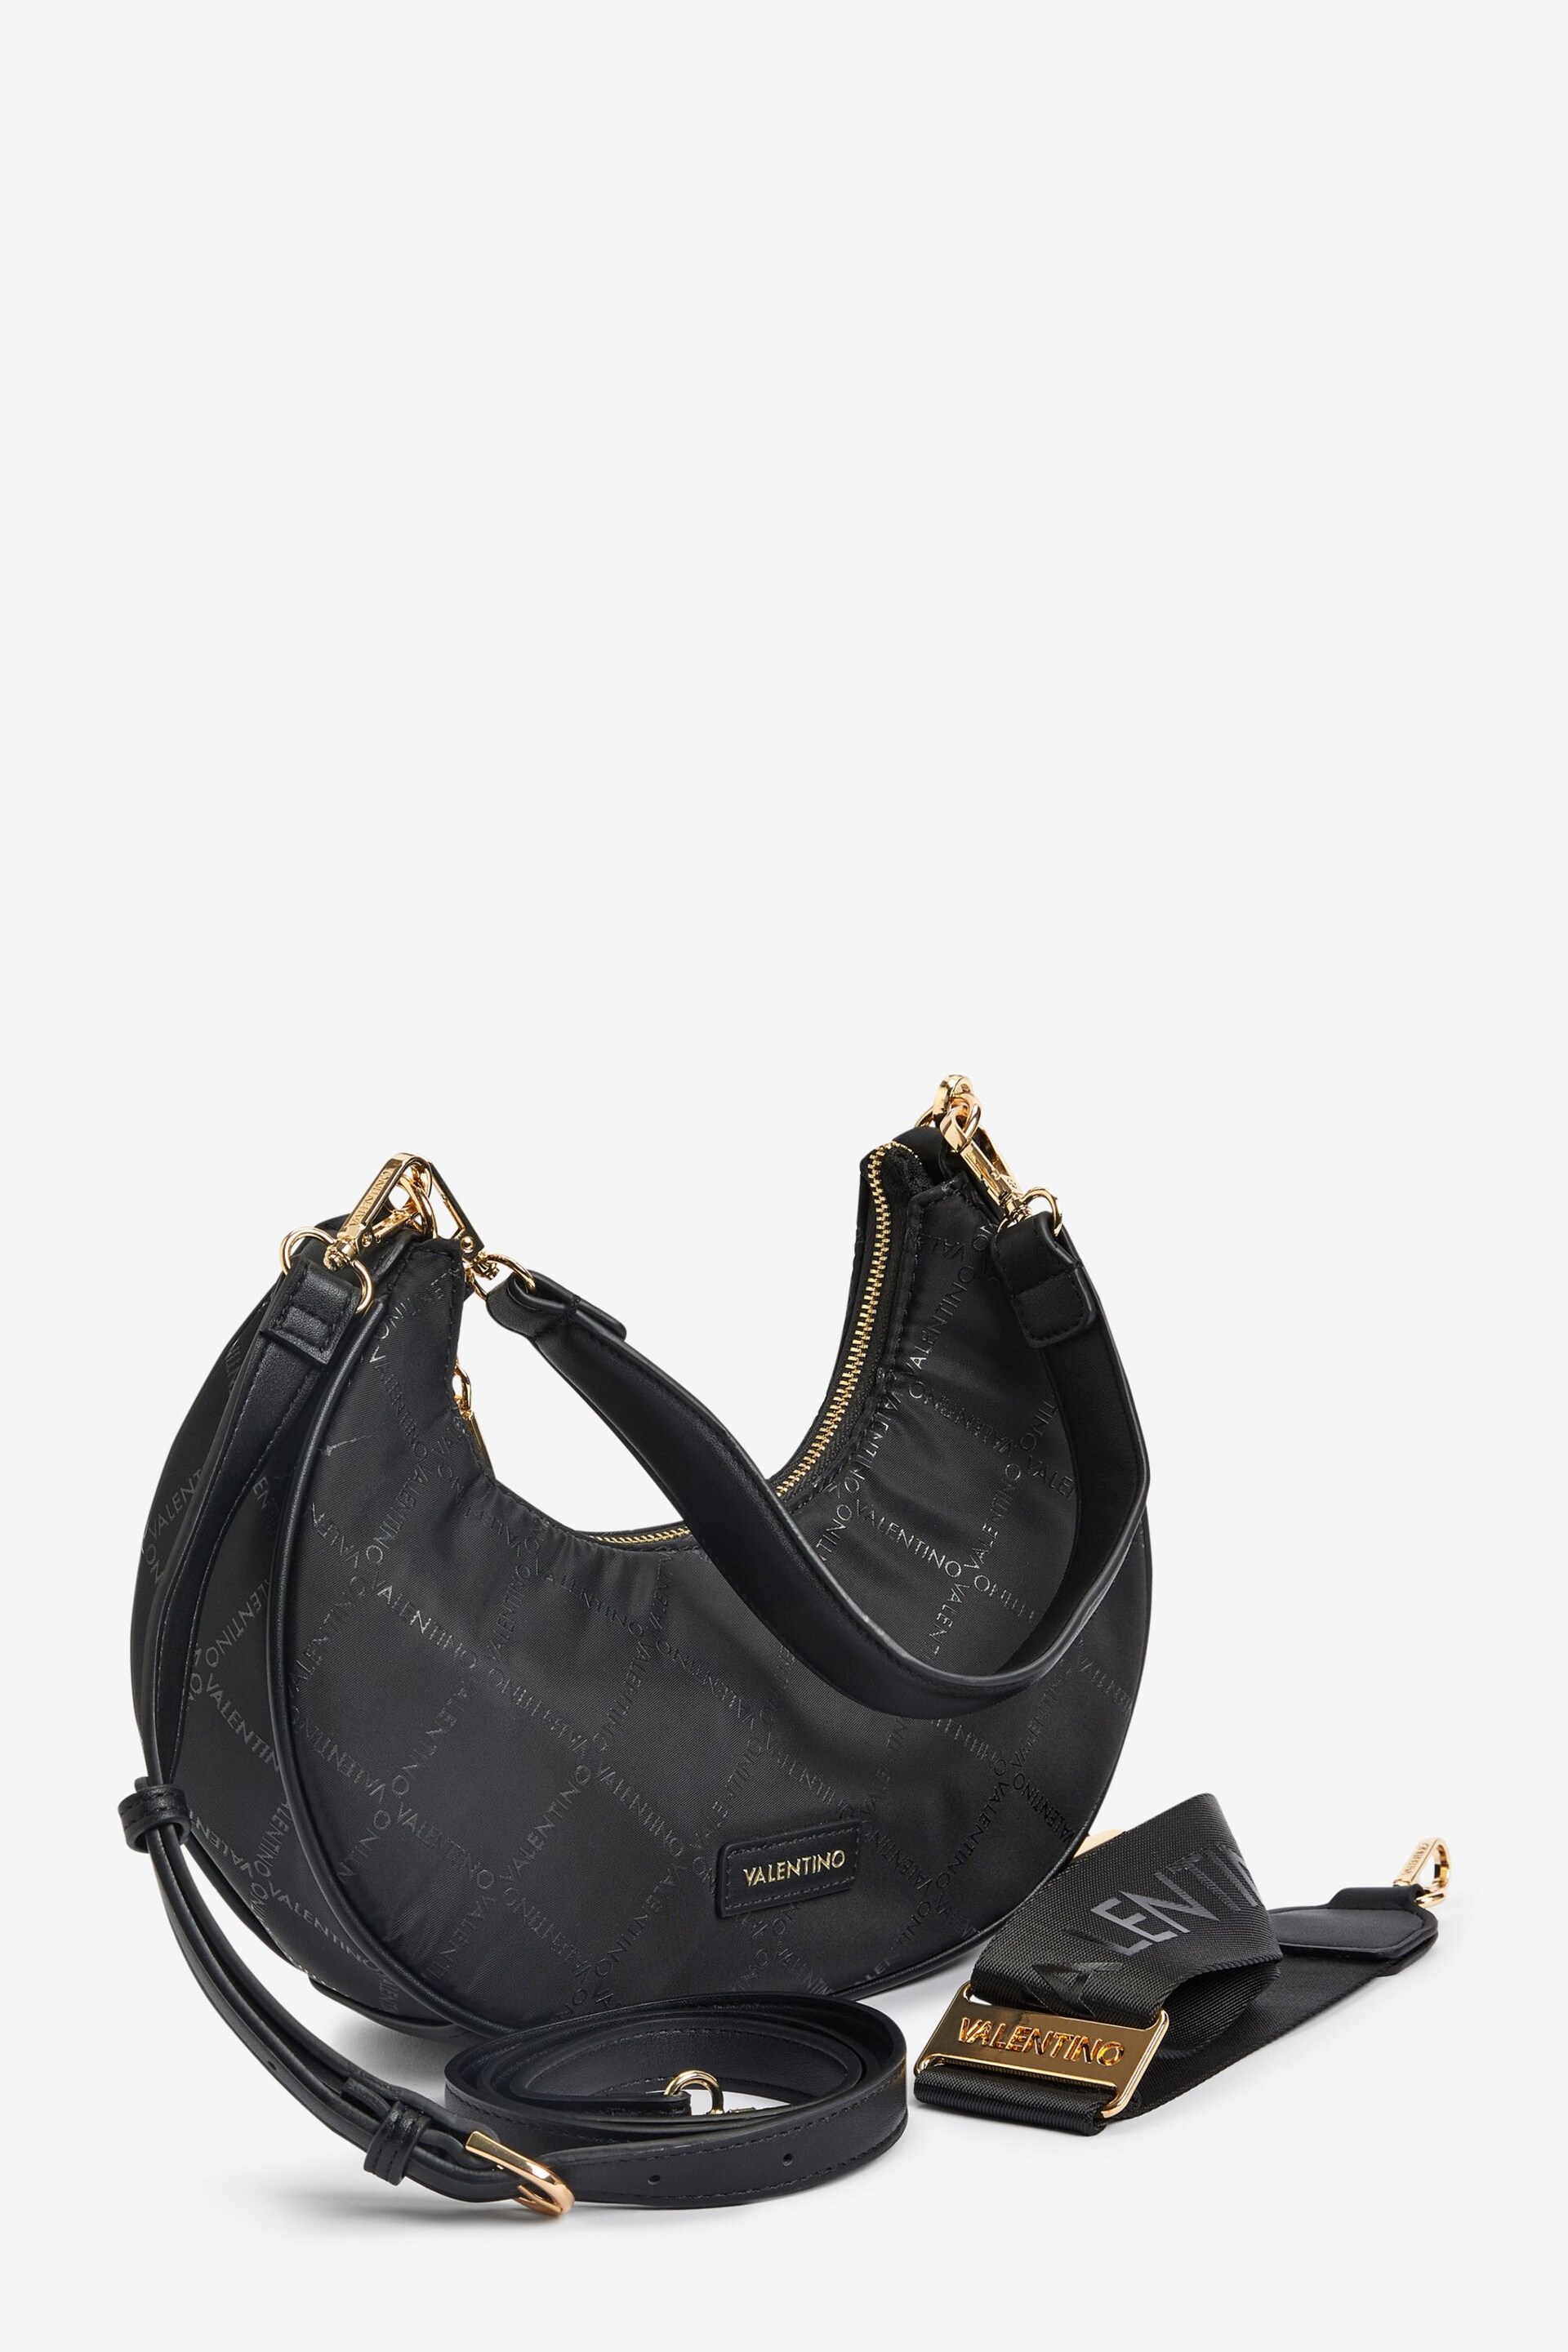 Valentino Bags Black Marais Recycled Logo Printed Shoulder Bag With Detachable ST - Image 1 of 7